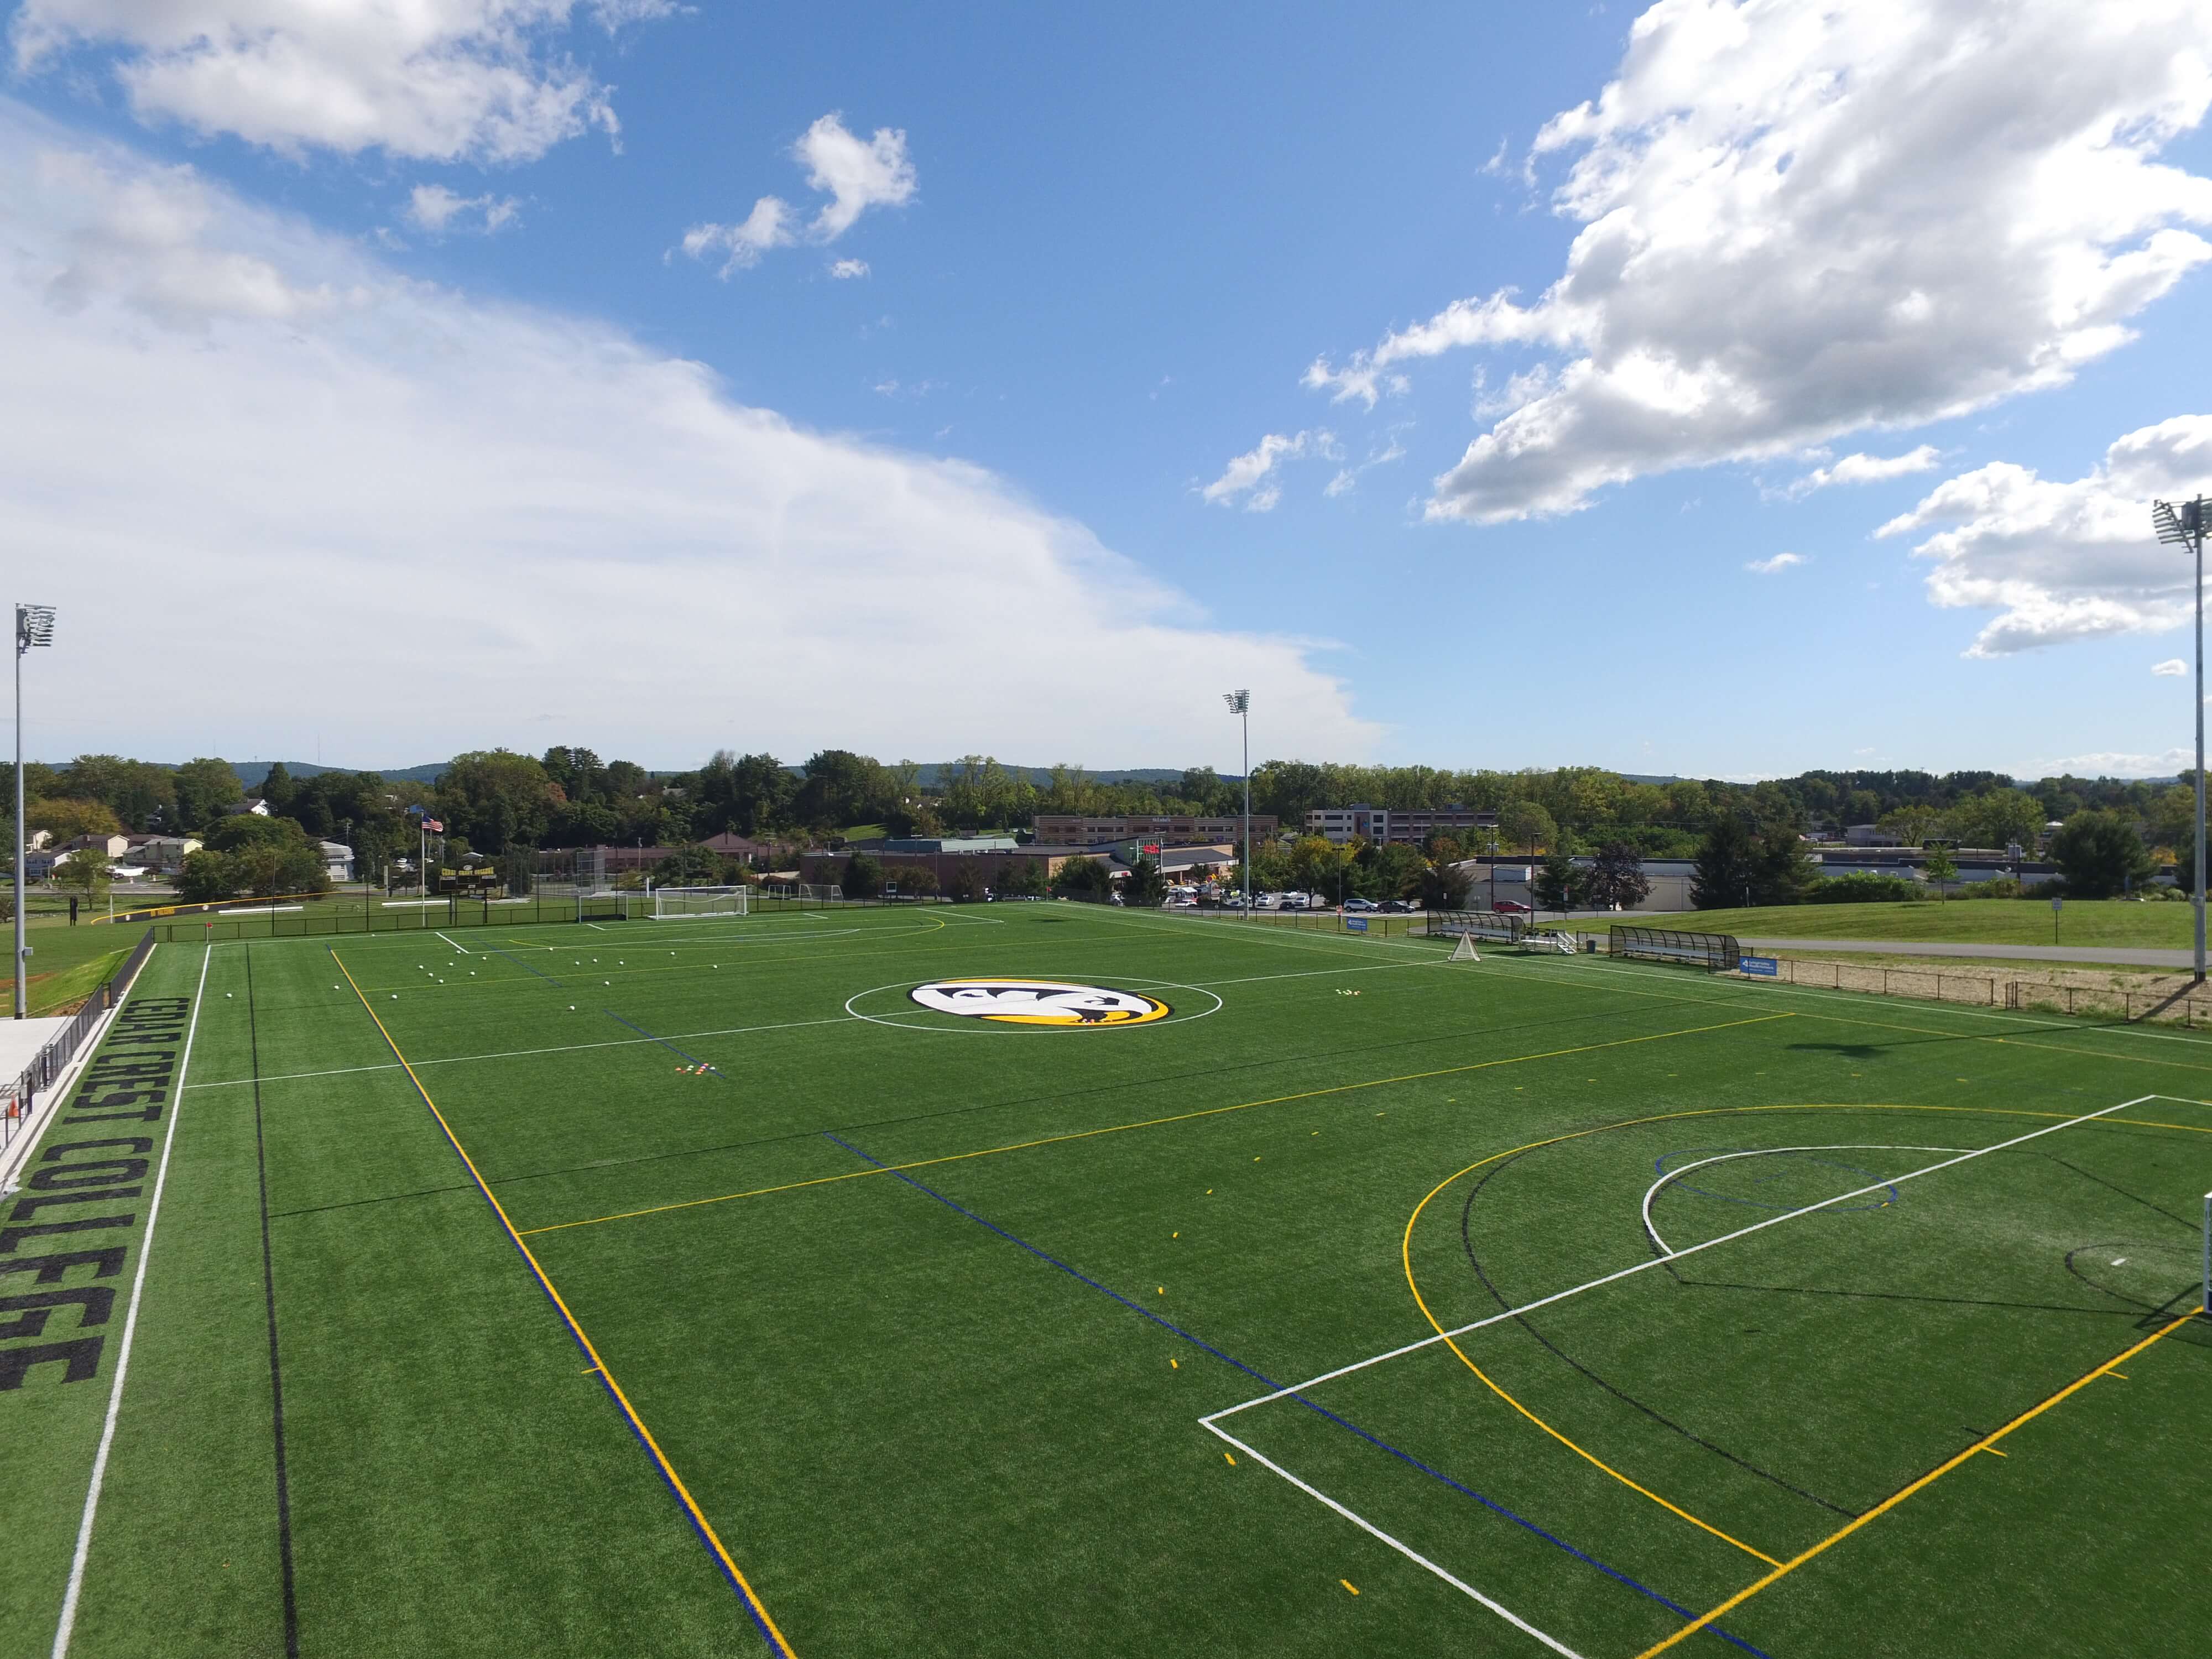 Artificial turf yields real benefits - Skepton Construction